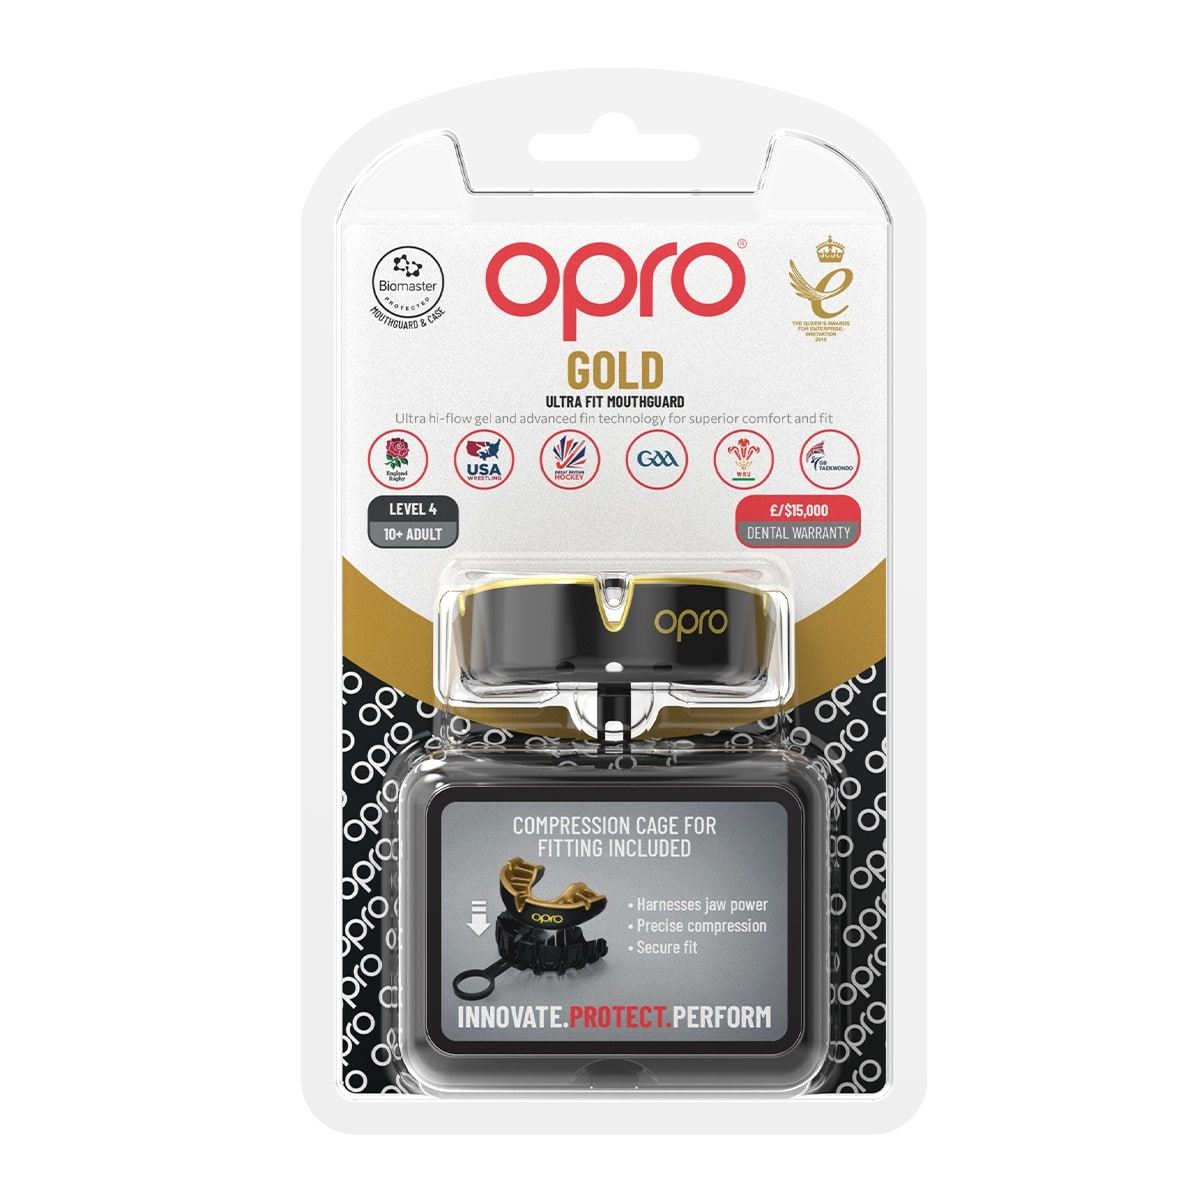 Men's Rugby Protective Mouthguard OPRO Self-Fit Gold 2022 Black/Gold Alternate 1